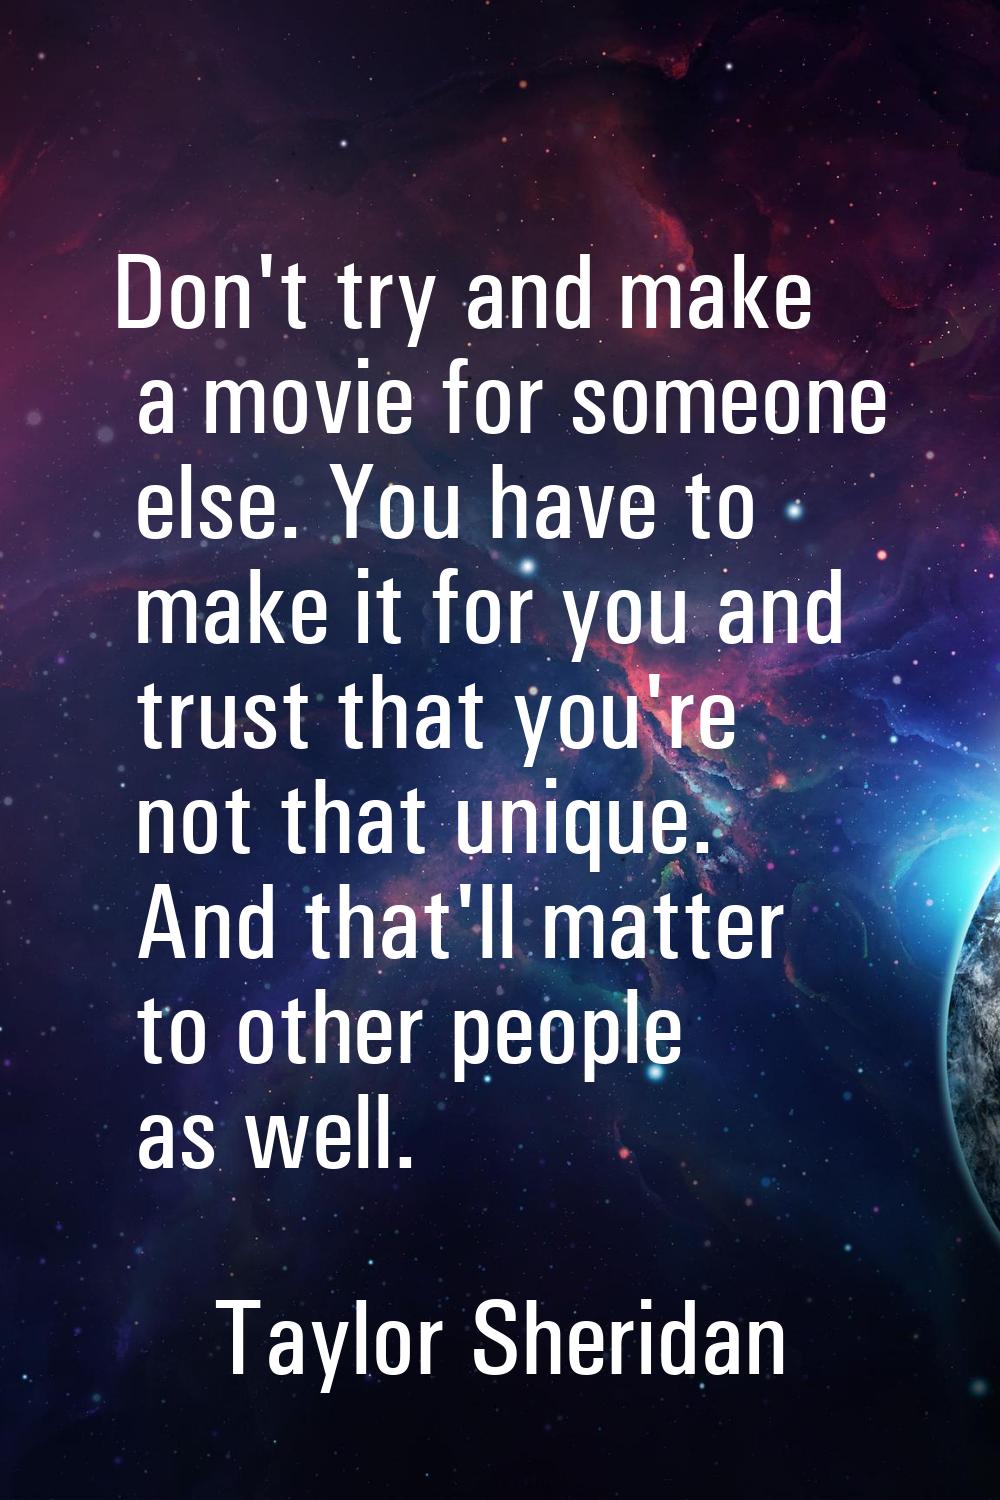 Don't try and make a movie for someone else. You have to make it for you and trust that you're not 